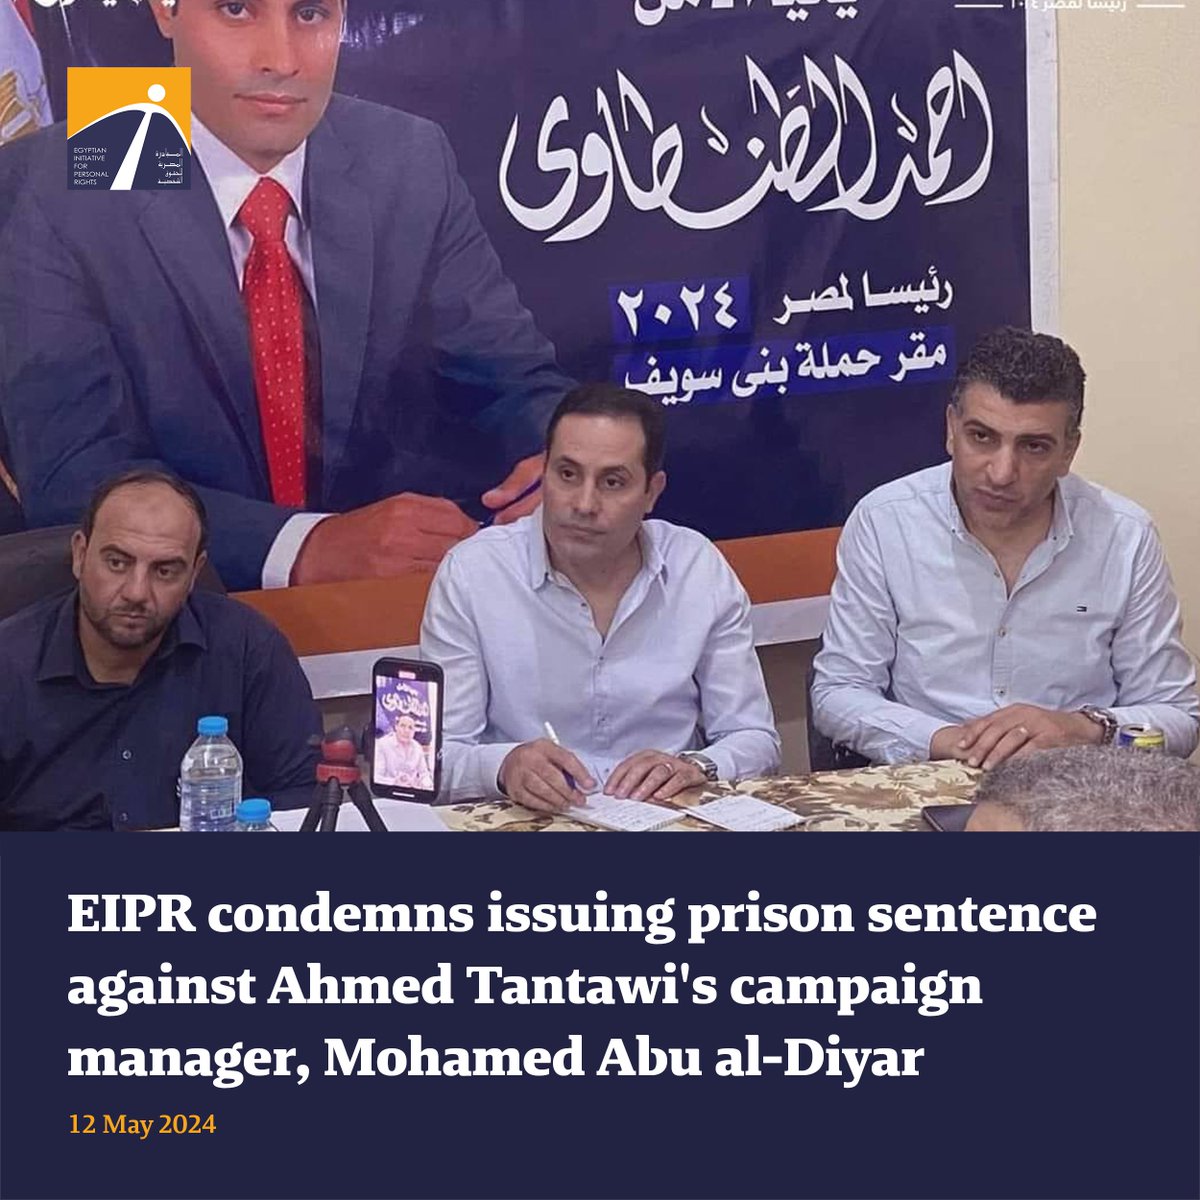 🟧 EIPR condemns the Matareya Misdemeanor Court's decision to uphold the prison sentence issued against lawyer Mohamed Abu al-Diyar, the campaign manager of former presidential hopeful Ahmed Tantawi. 🔗 Read the full statement: tinyurl.com/ywt582pt